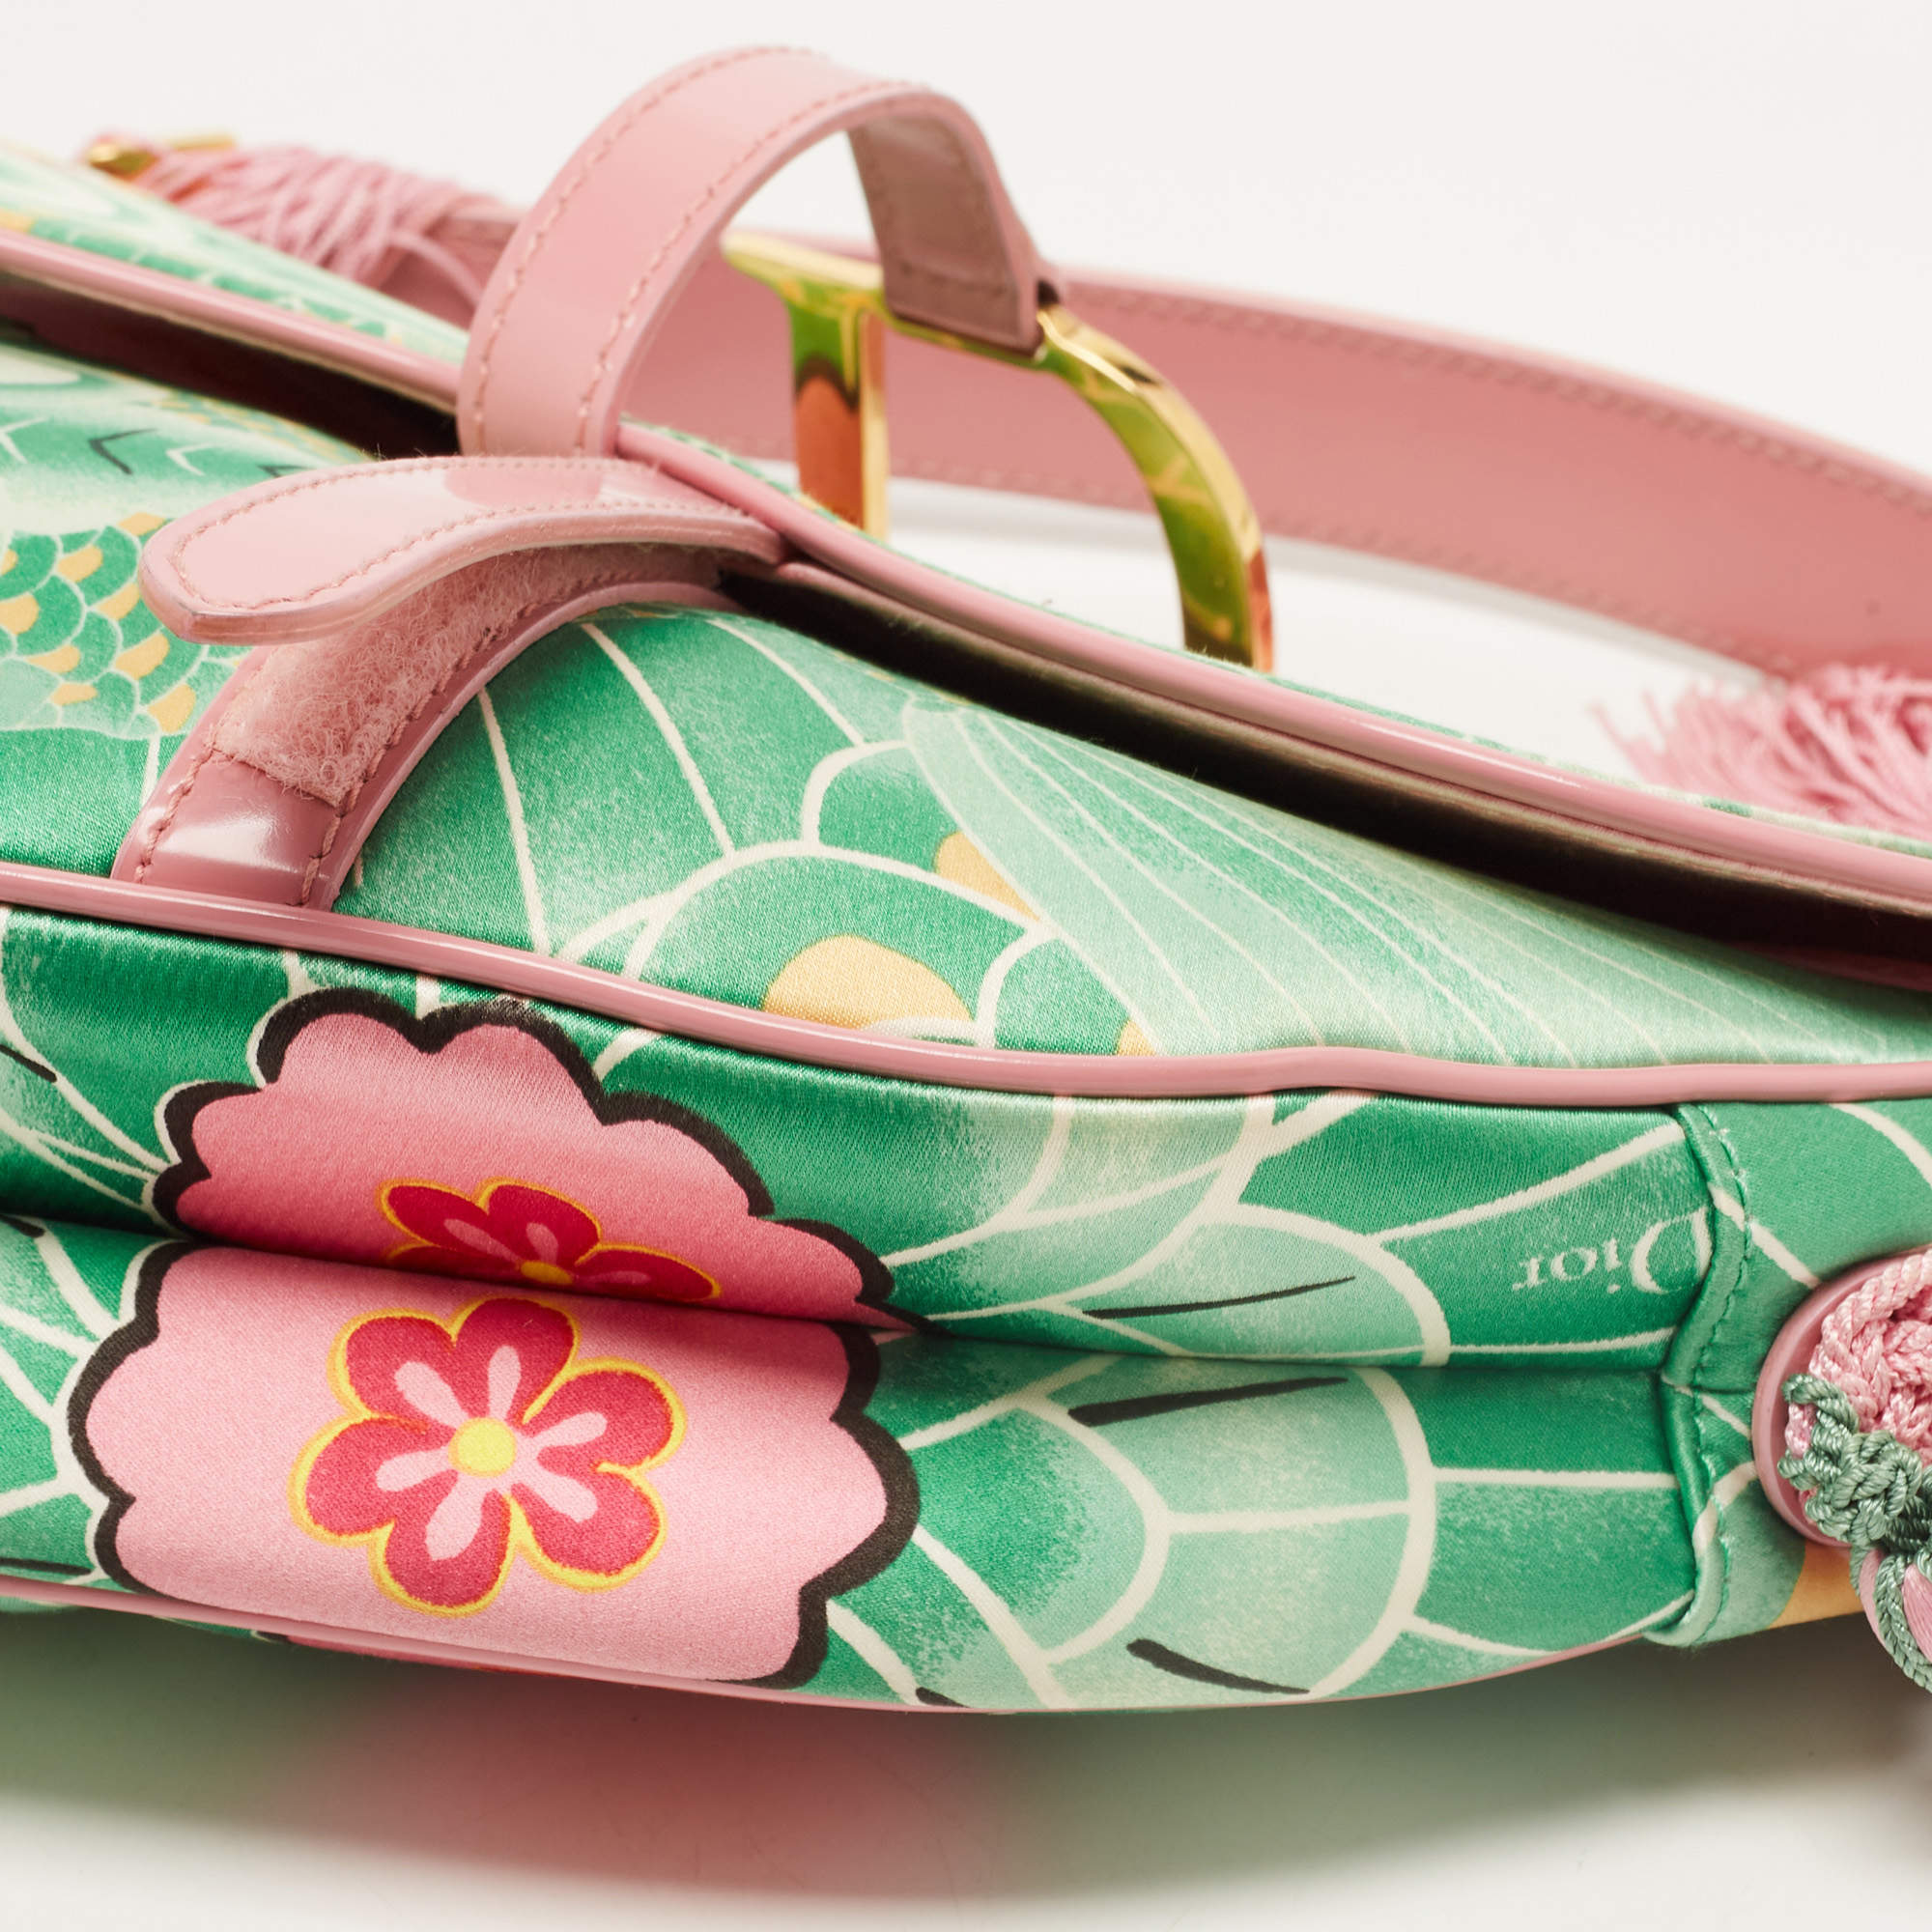 Dior Pink/Green Printed Satin and Glazed Leather Limited Edition